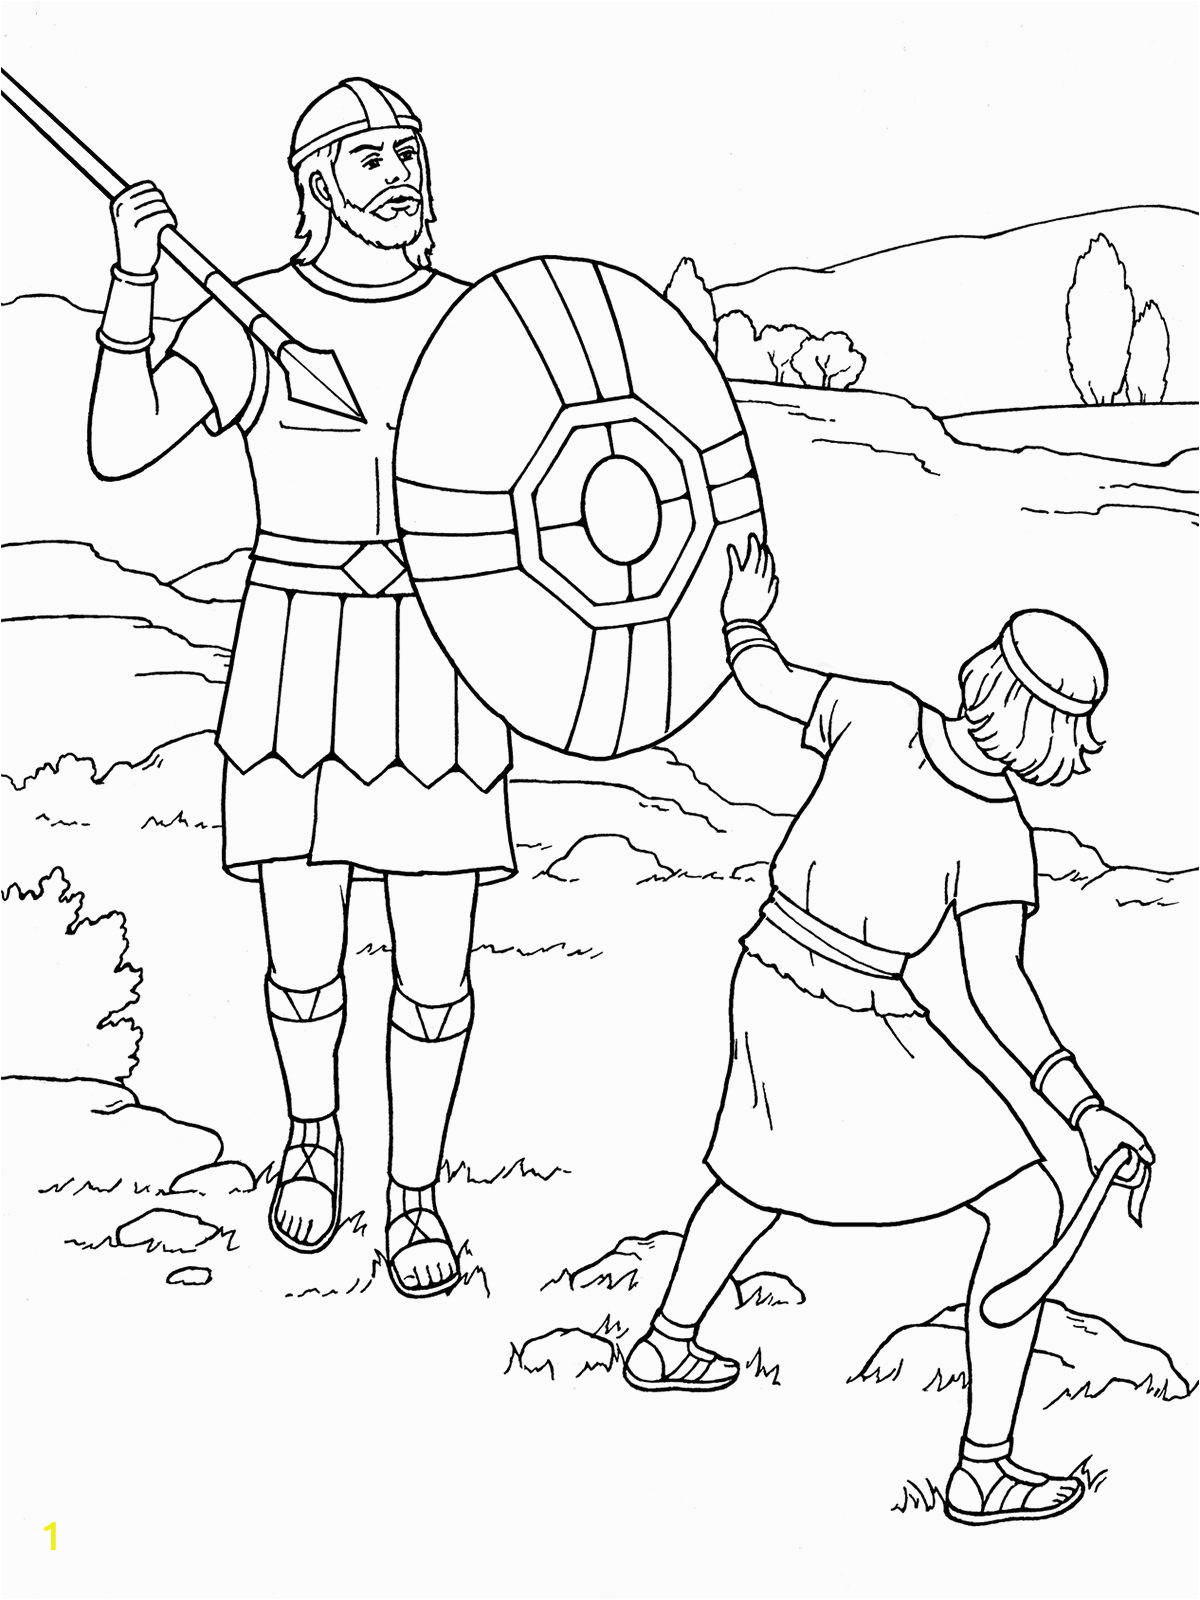 Free Bible Coloring Pages David and Goliath David and Goliath Coloring Pages